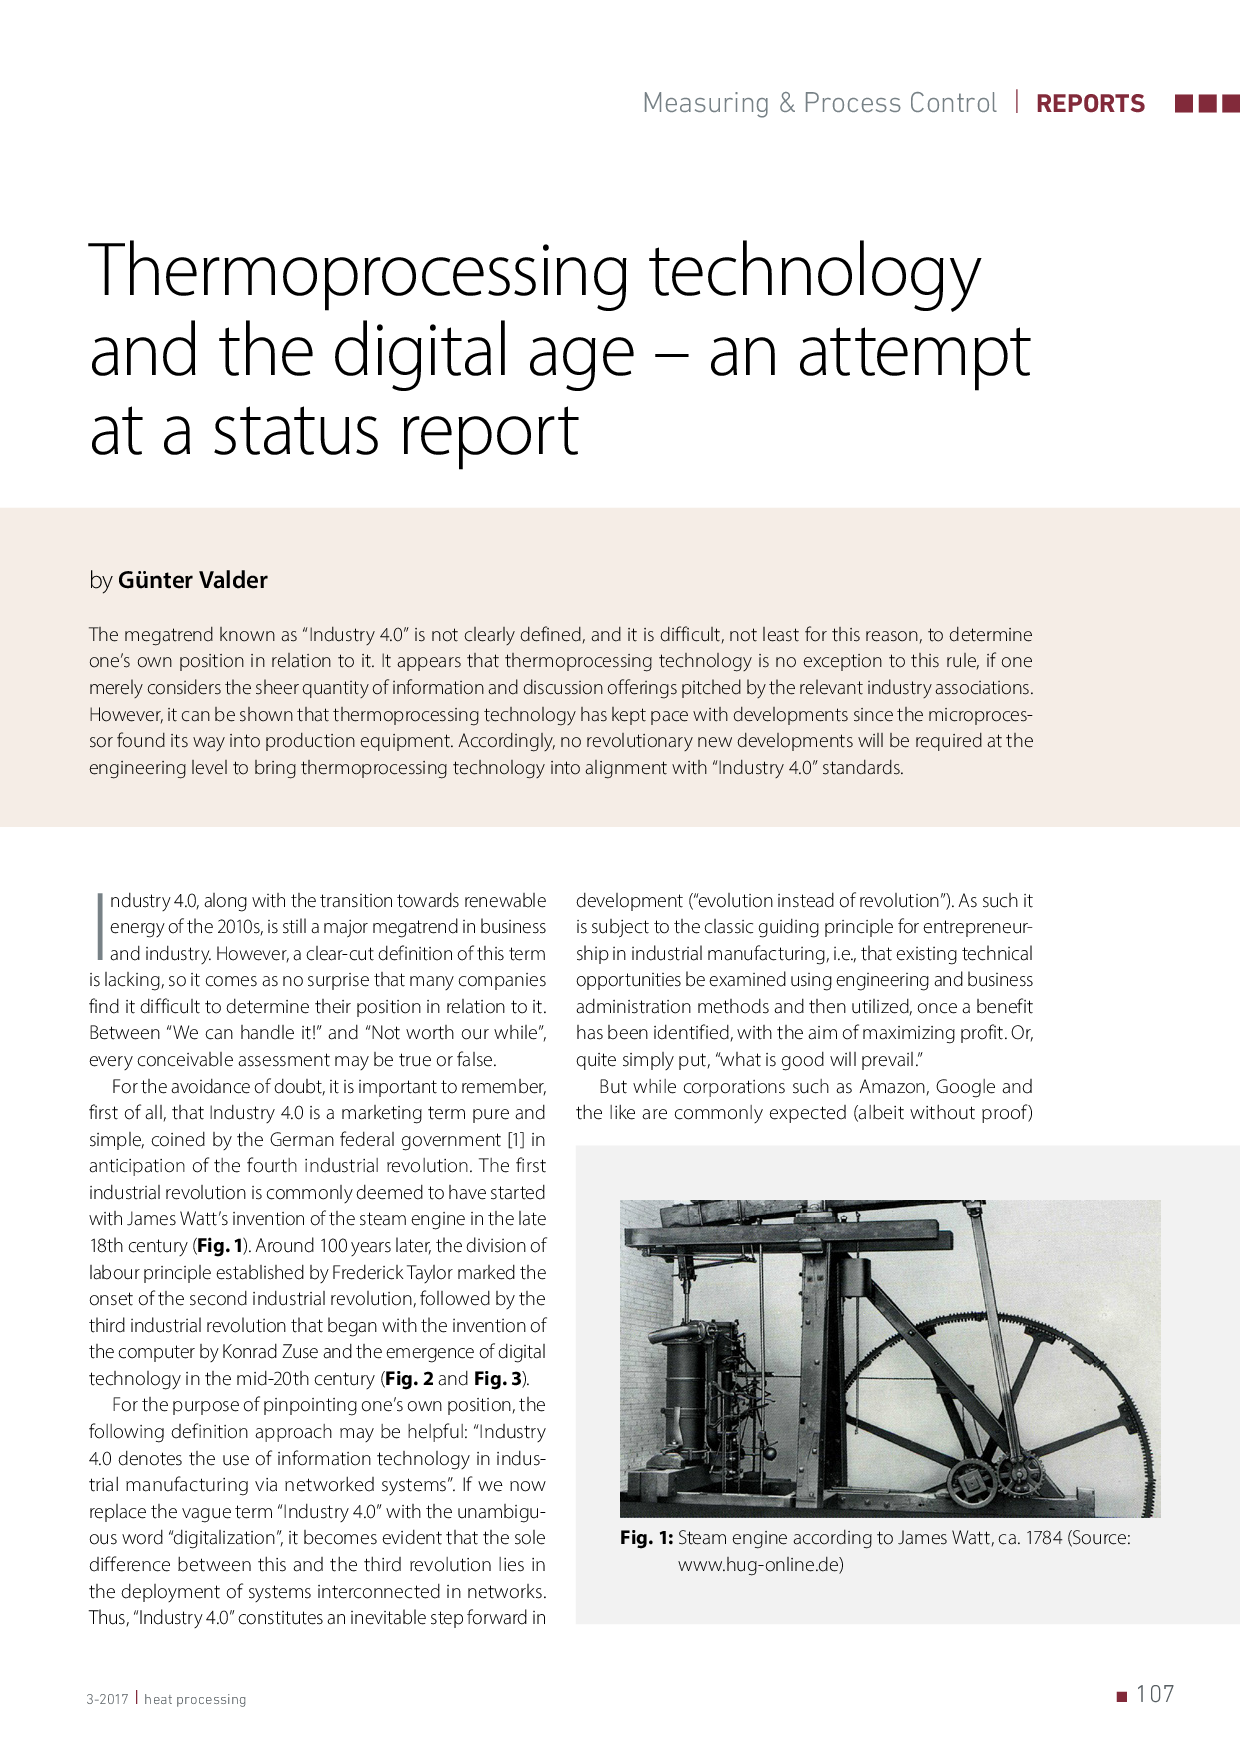 Thermoprocessing technology and the digital age – an attempt at a status report